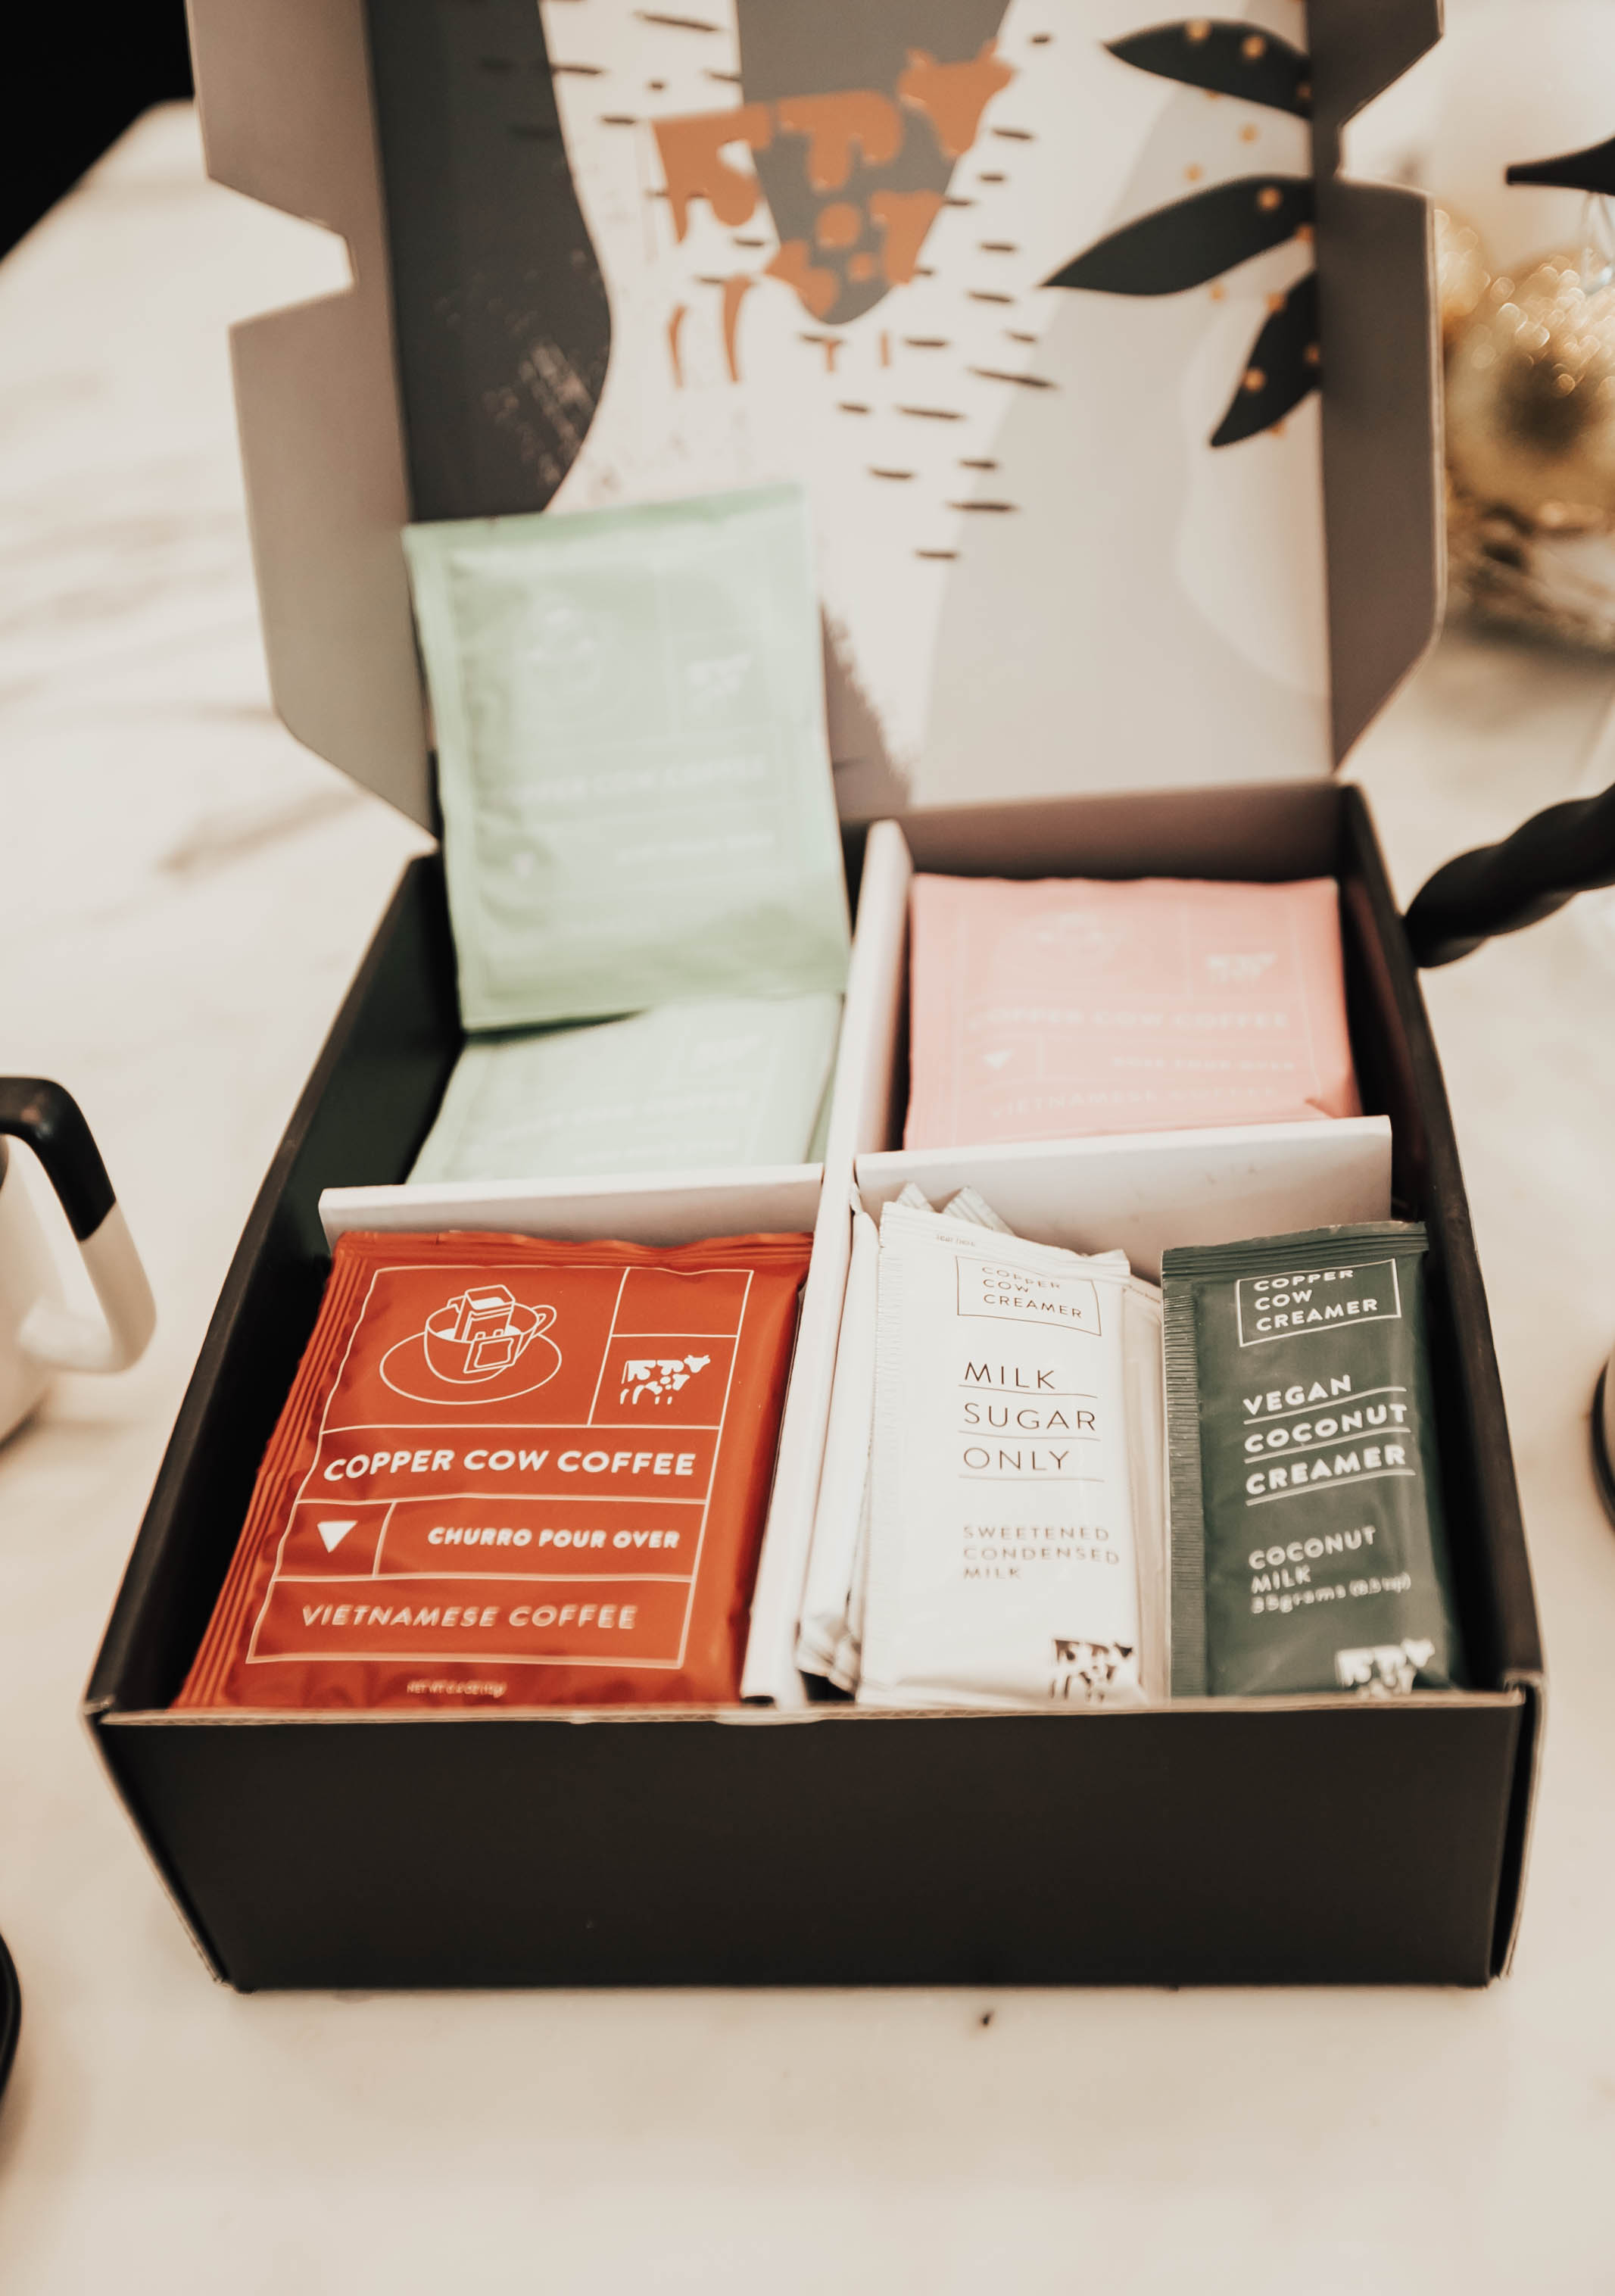 Two Peas in a Prada co-founder Emily Farren Wieczorek shares the best gift idea for the cool person on your list - Copper Cow Coffee !